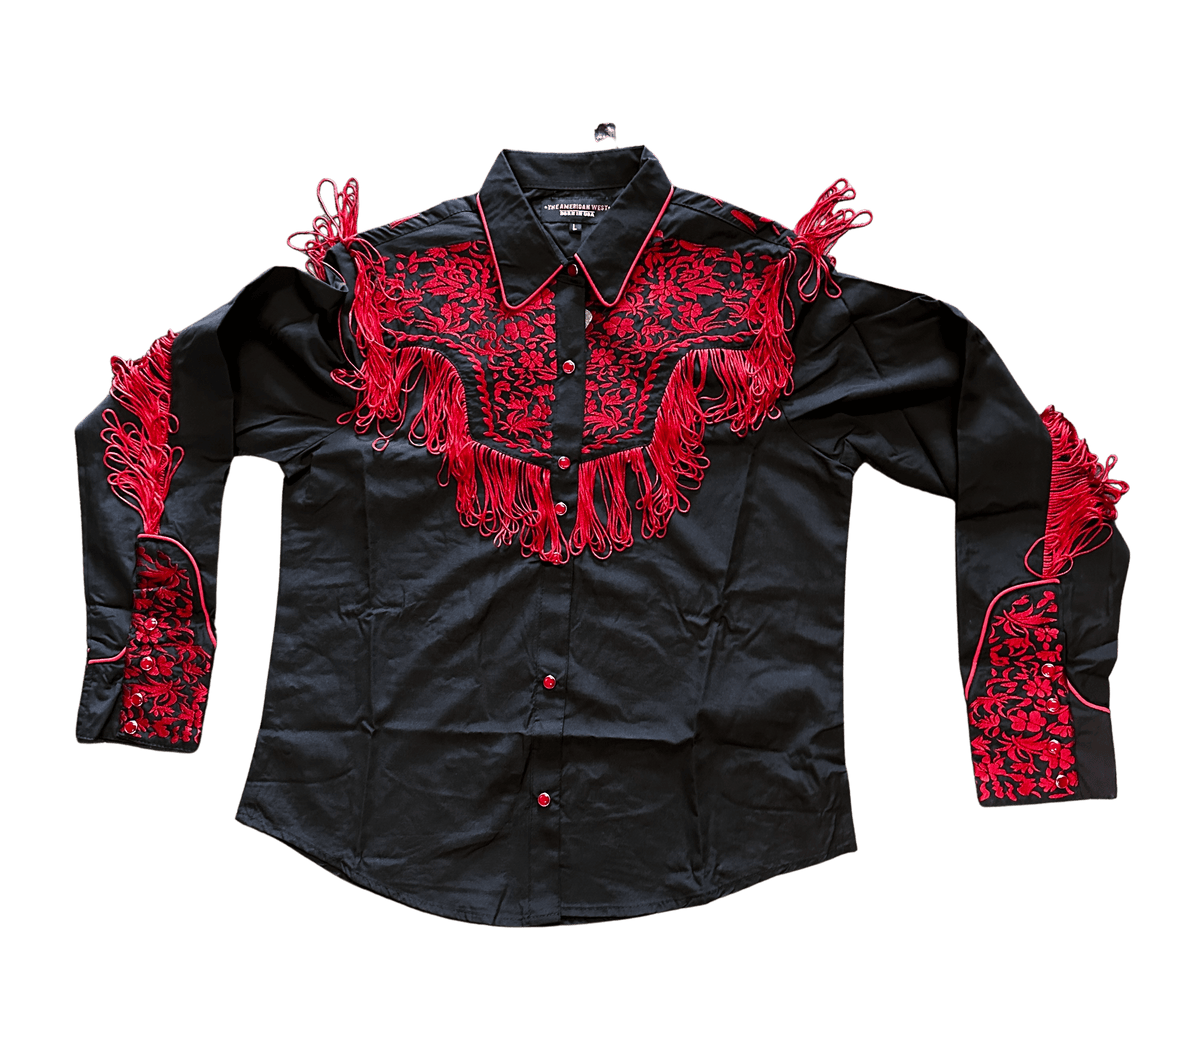 Around Town - Black and Red Fringe Western Shirt (Size XS, S, M, L